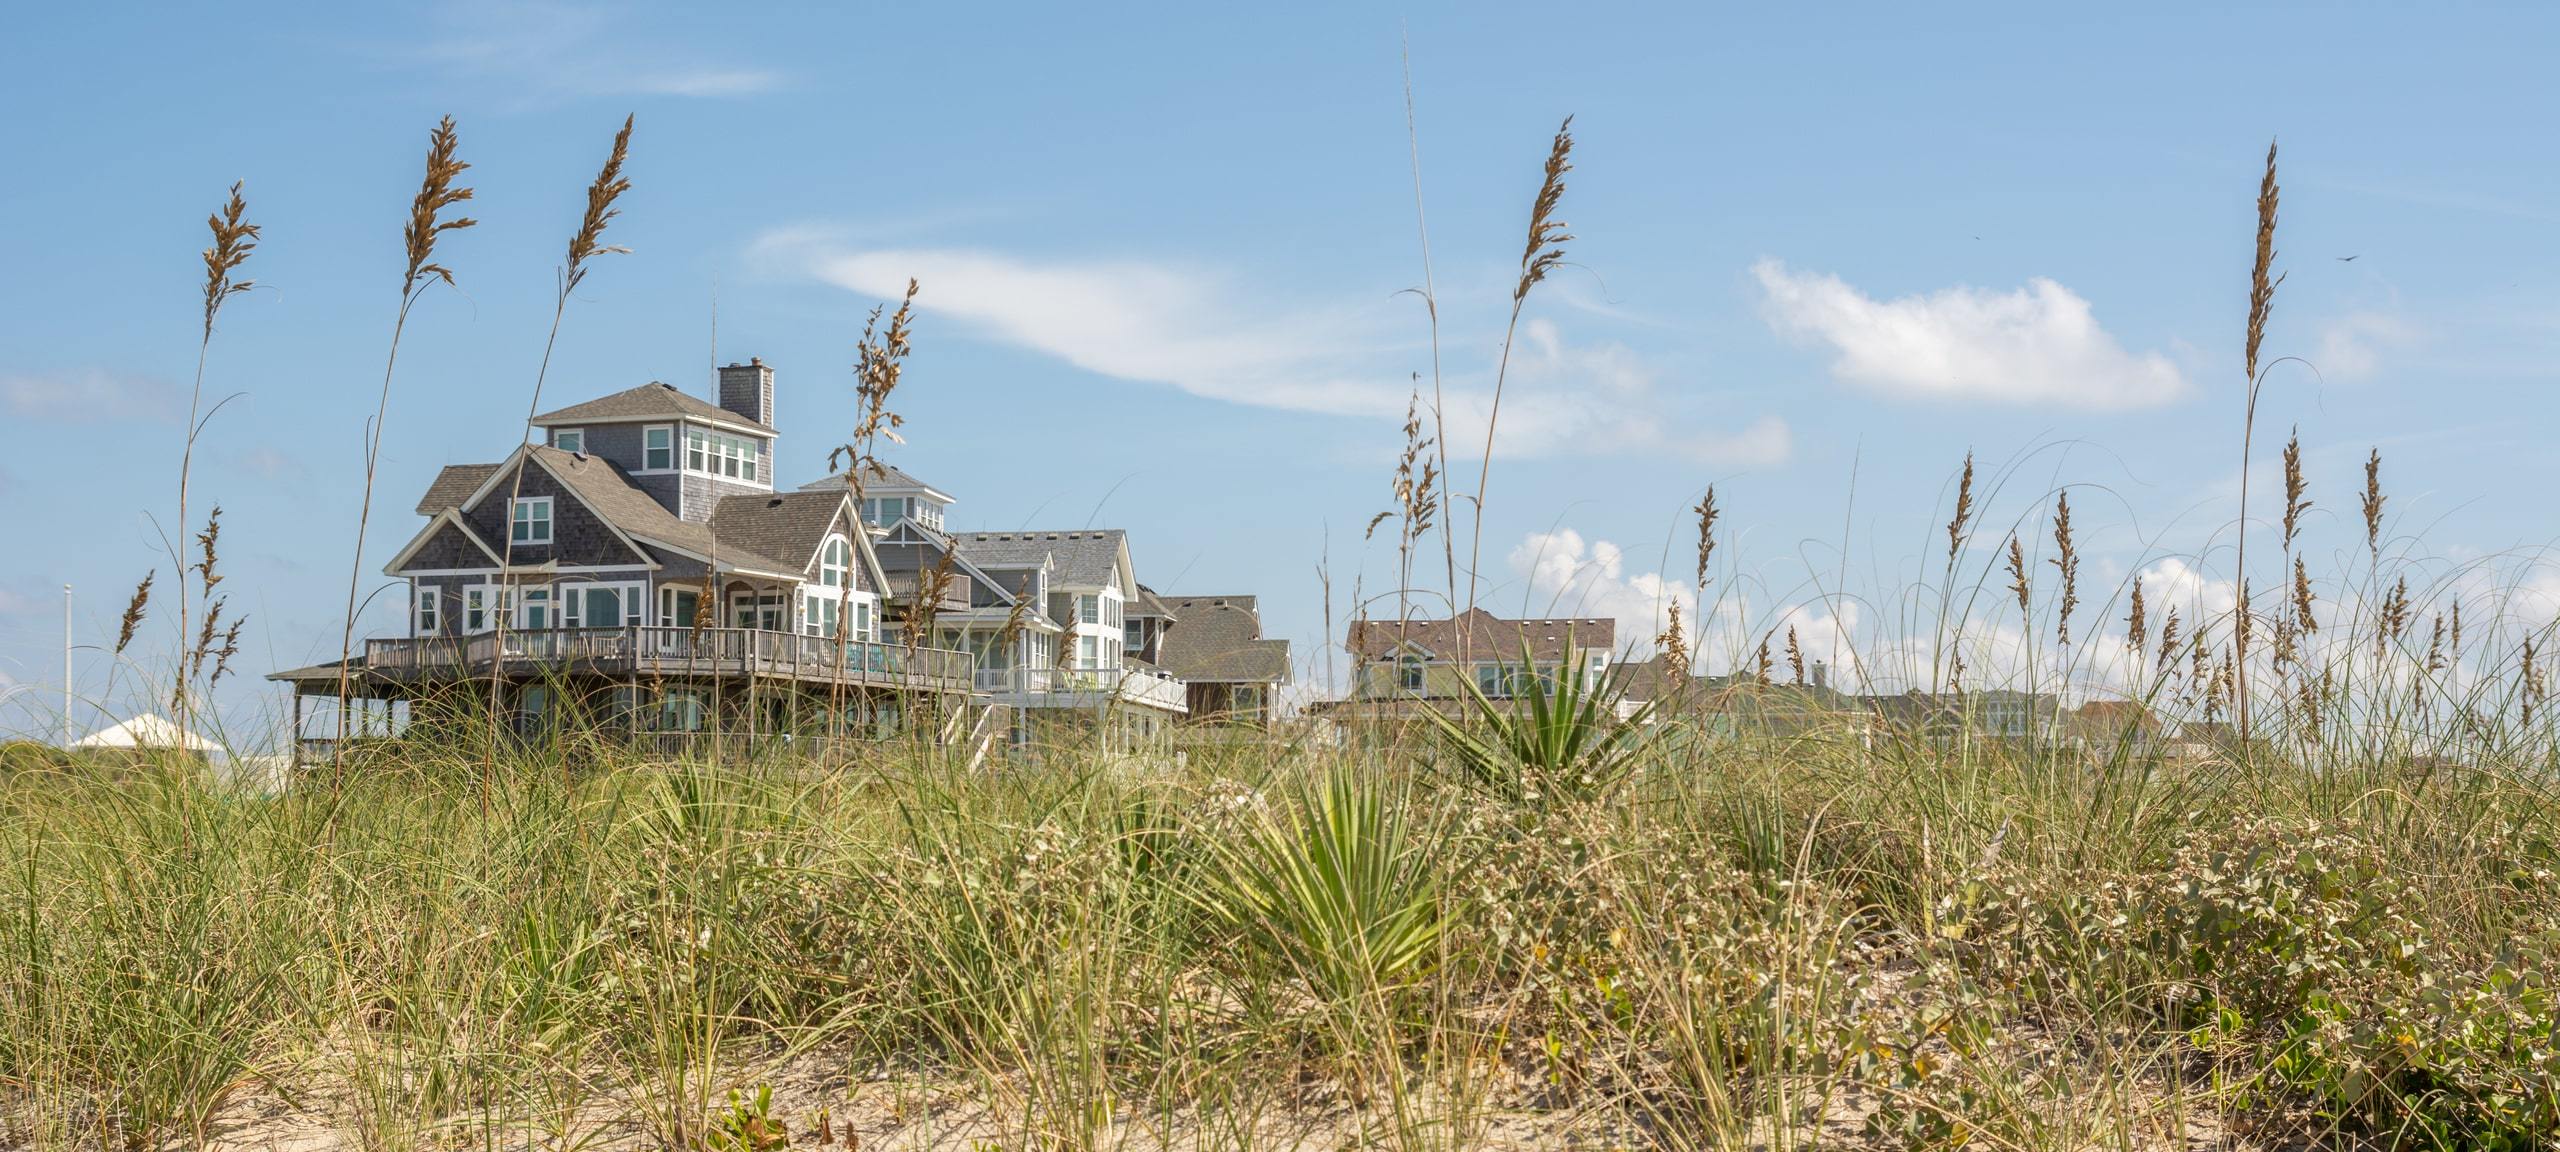 Oceanfront homes along the Jersey Shore with long green grasses on the dunes